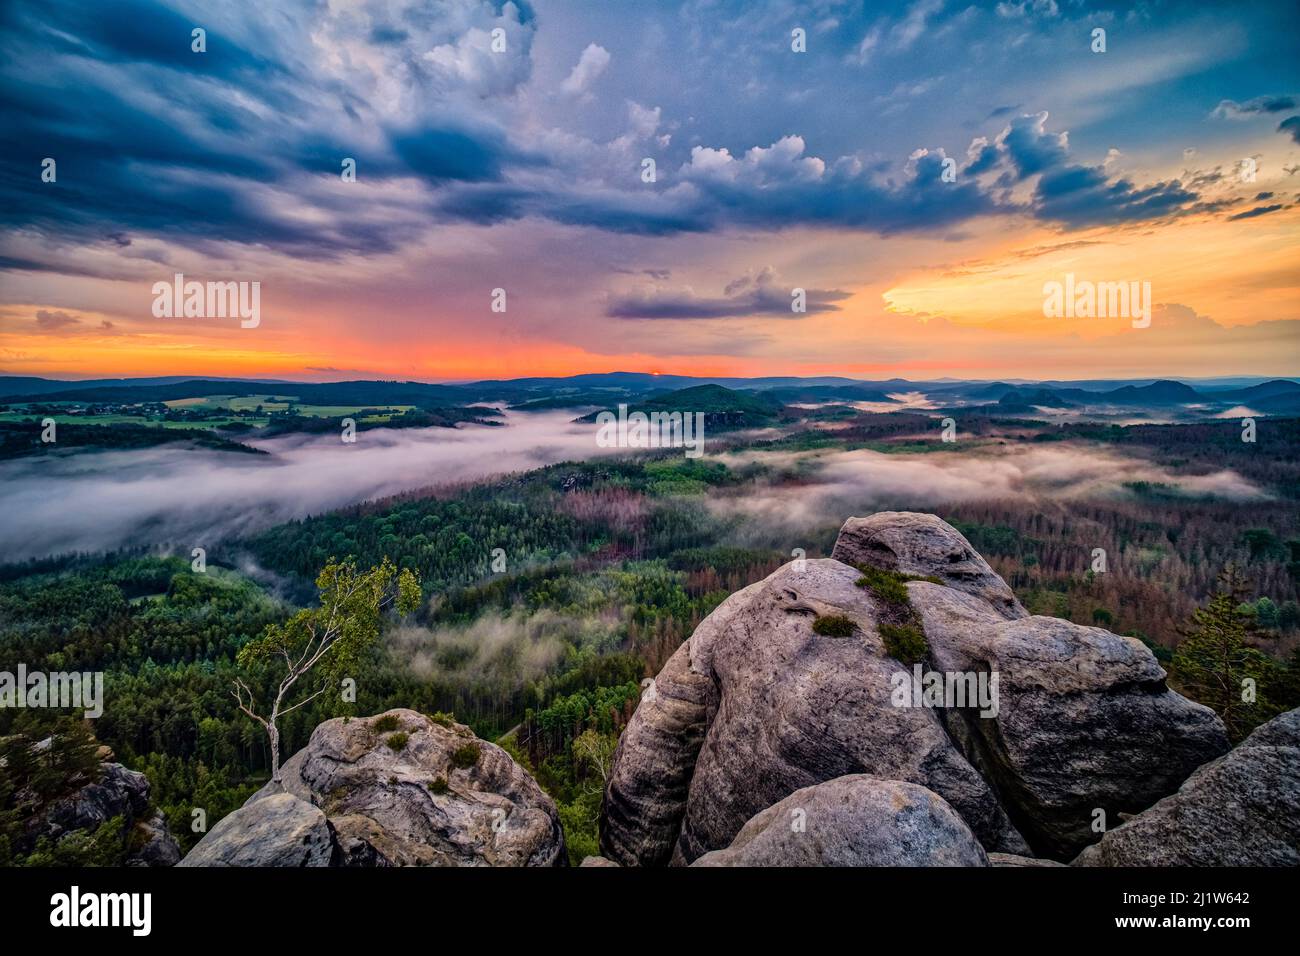 Landscape with rock formations in Affensteine area of the Saxon Switzerland National Park at sunrise. Stock Photo